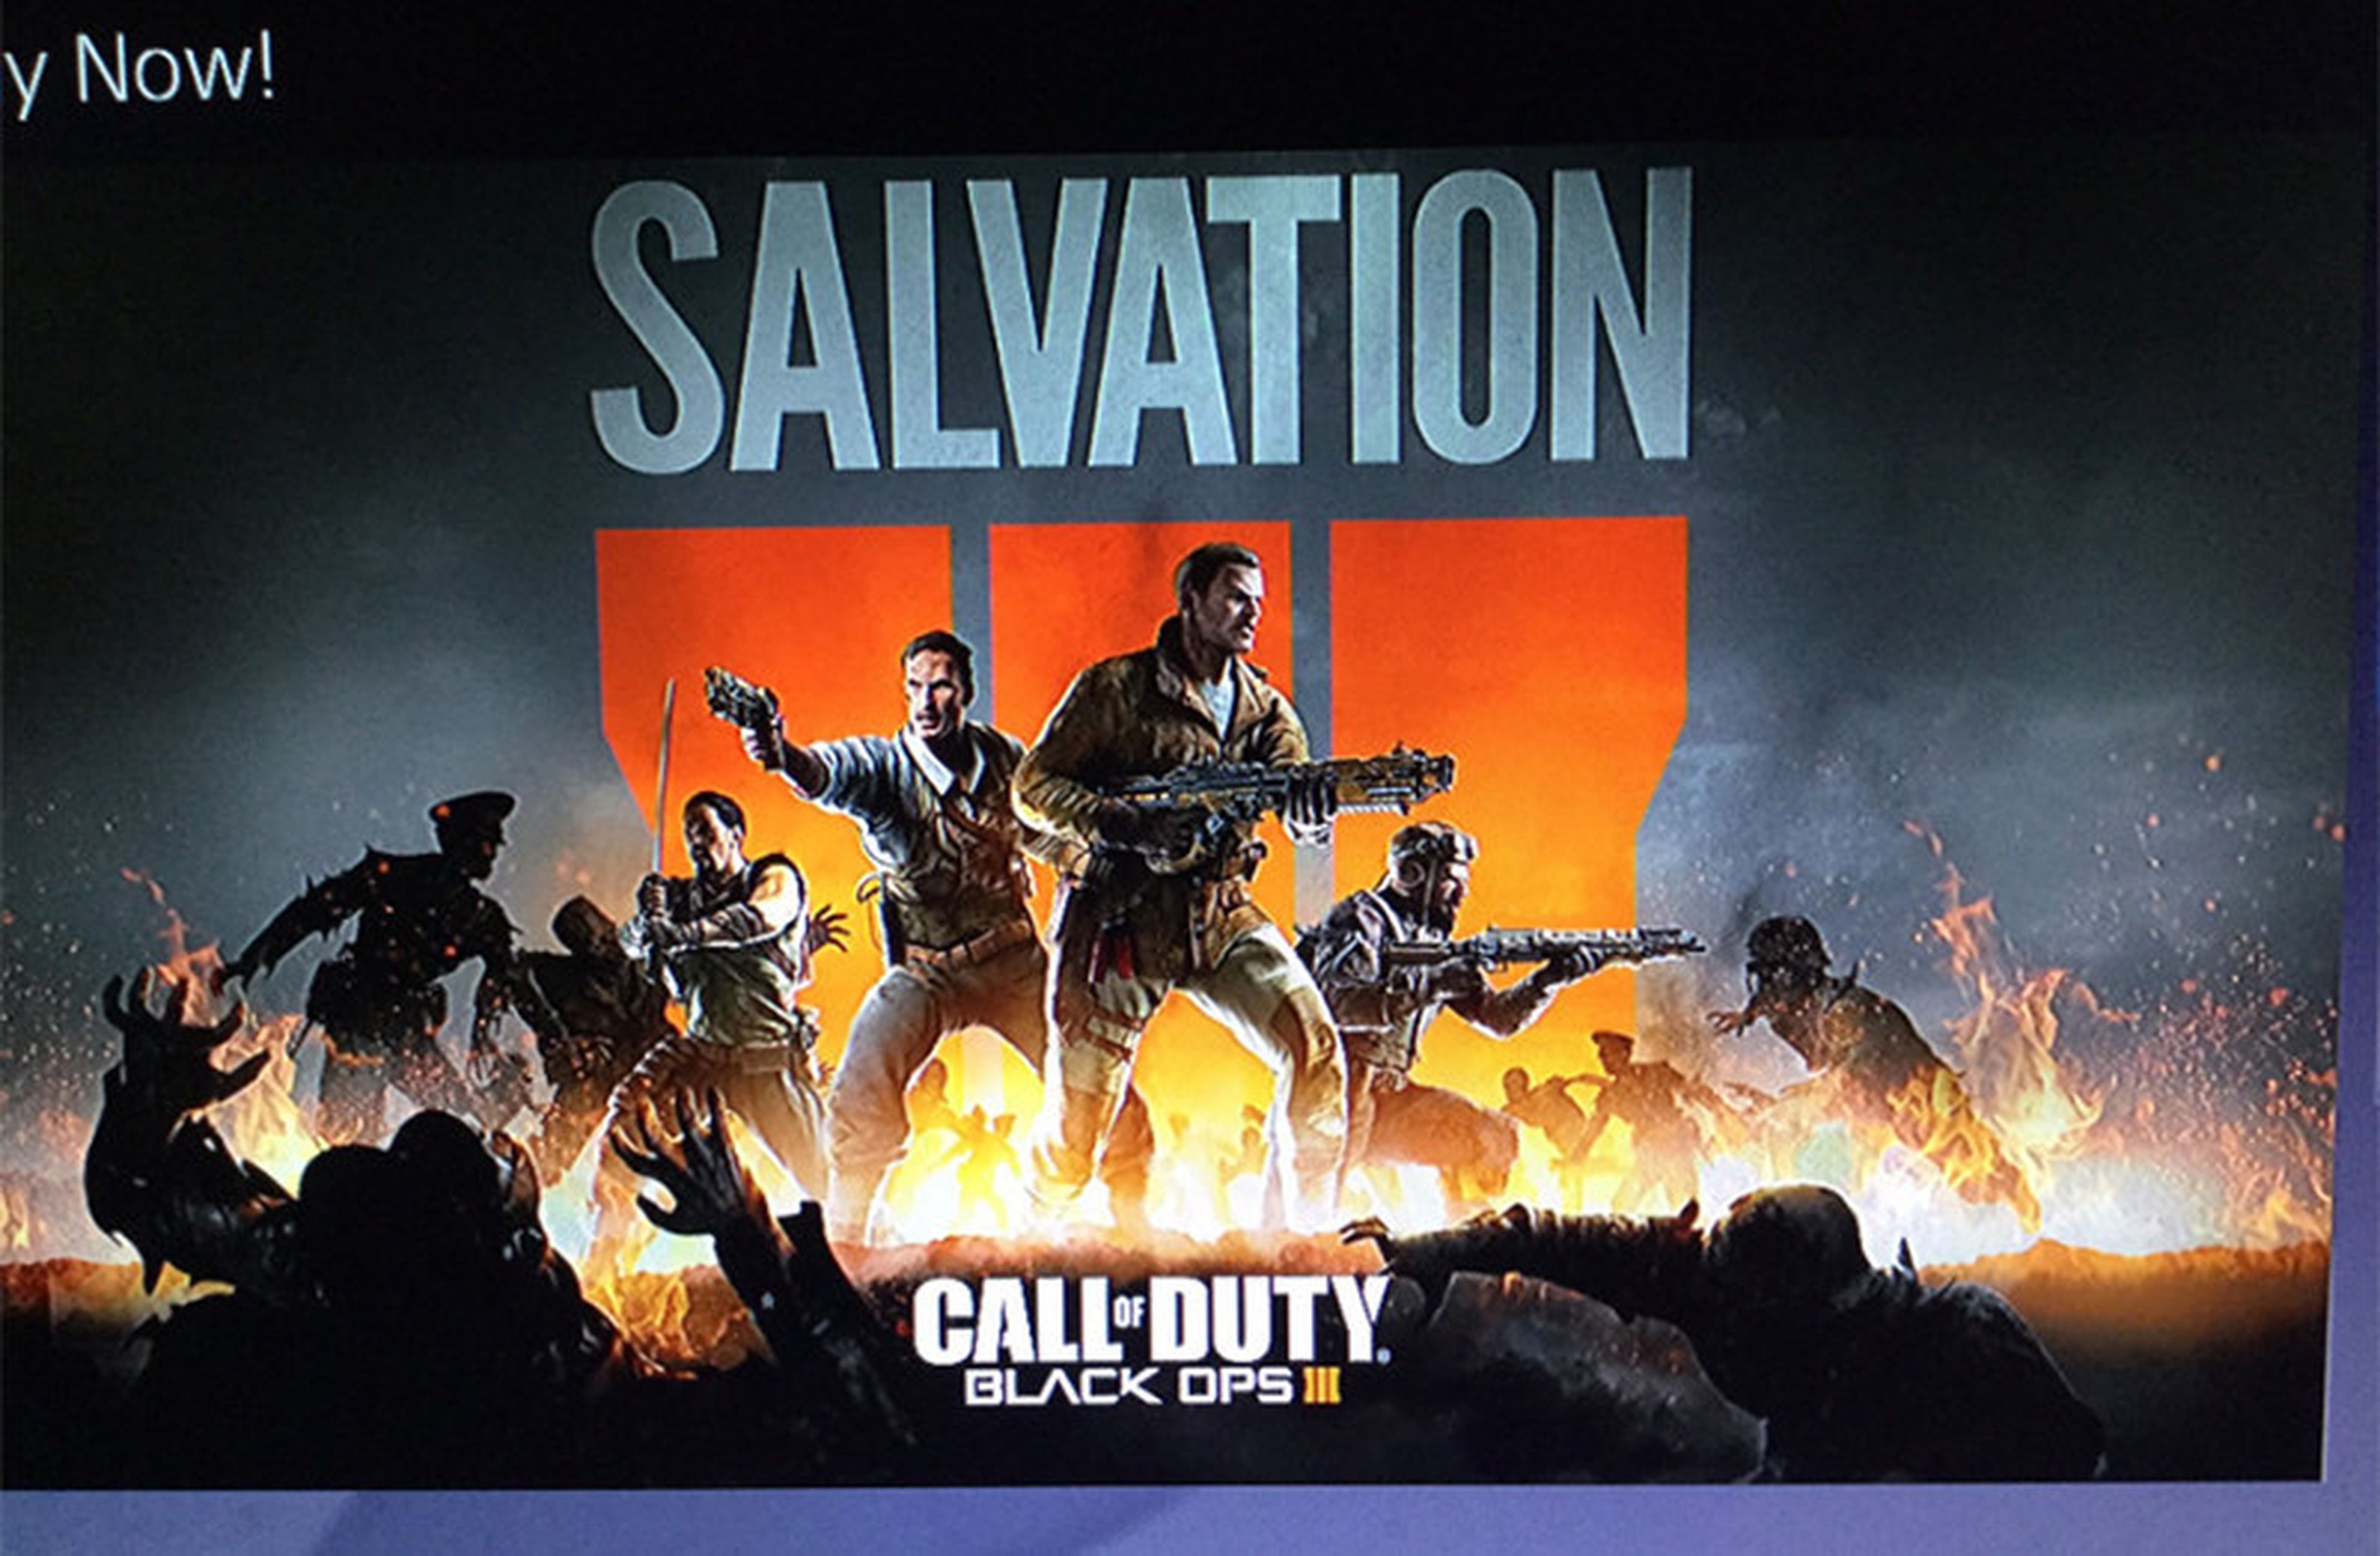 Call of Duty Black Ops 3 Salvation